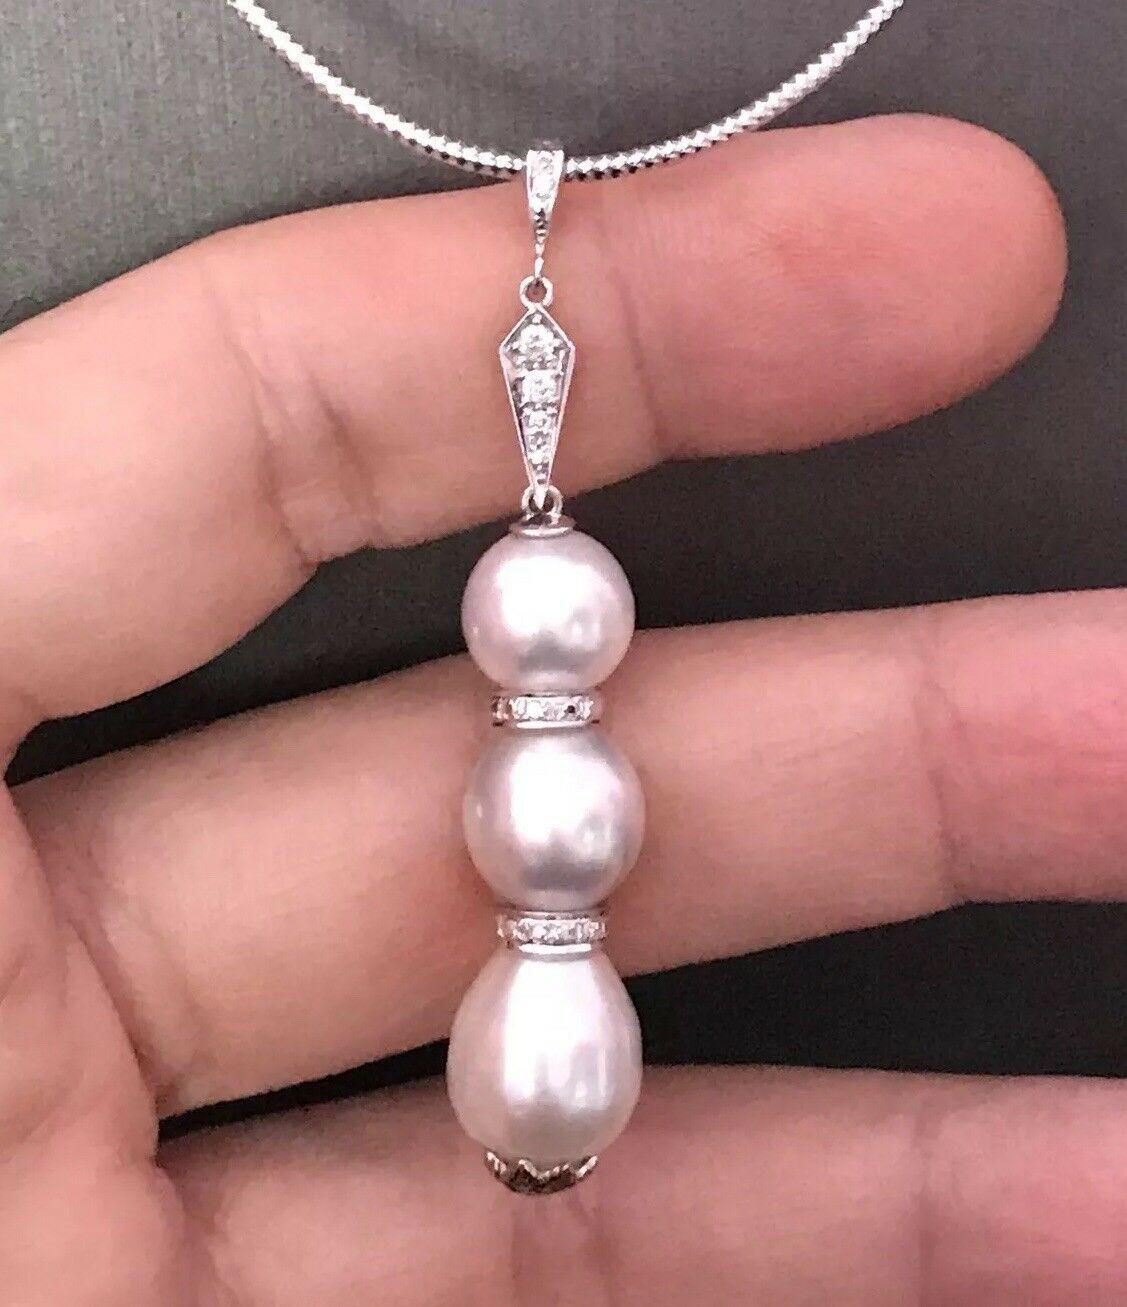 Fine Quality South Sea Pearl Diamond Necklace 14k Gold 12 mm Italy Certified $3,490 817269

This is a Unique Custom Made Glamorous Piece of Jewelry!

MADE IN ITALY

Nothing says, “I Love you” more than Diamonds and Pearls!

This South Sea pearl